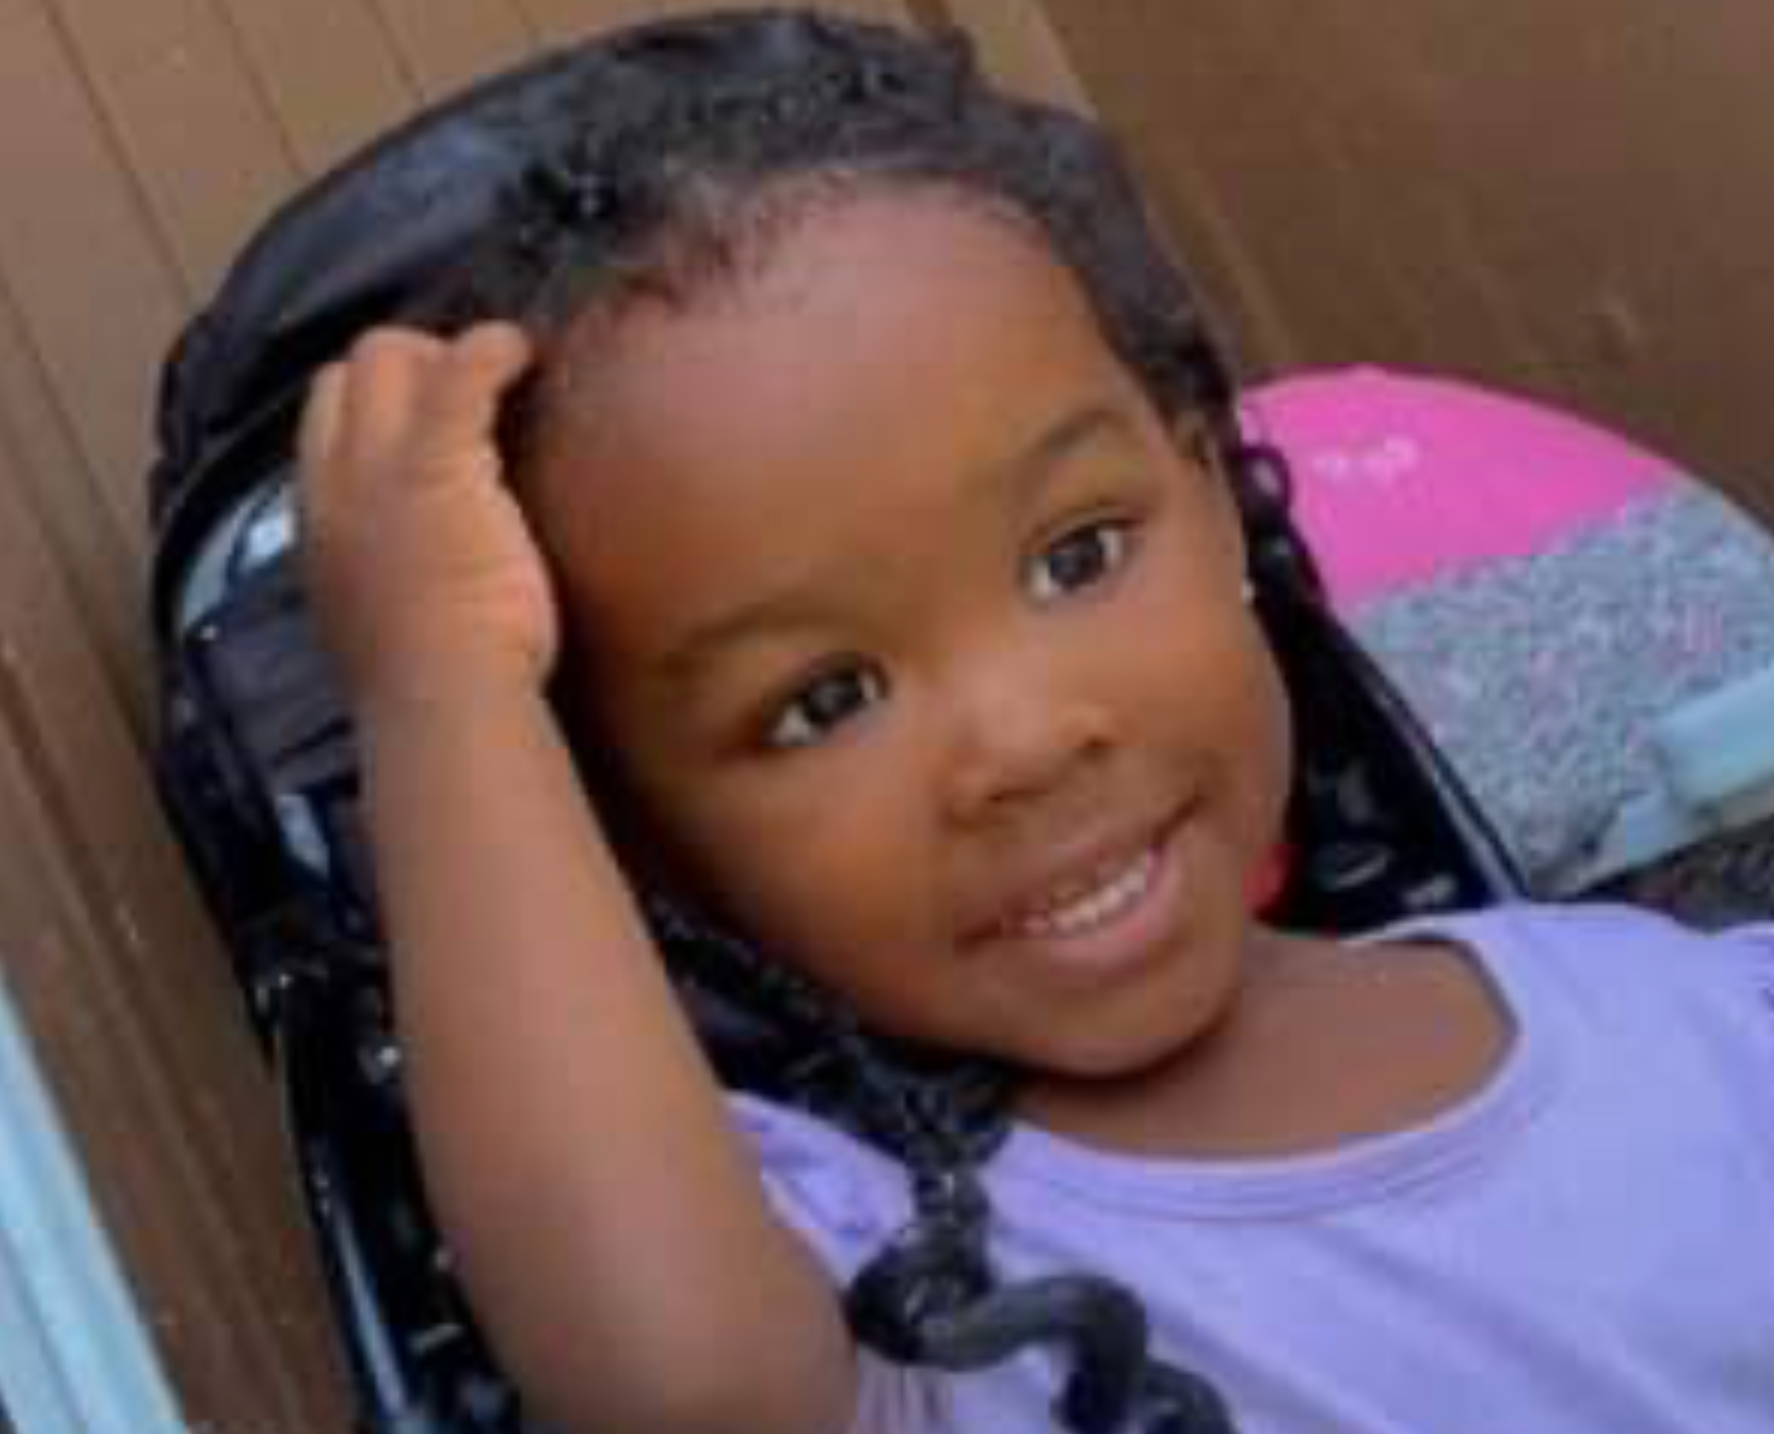 Wynter Cole Smith, 2, is still missing after she was allegedly abducted by her mother’s ex-partner Rashad Trice